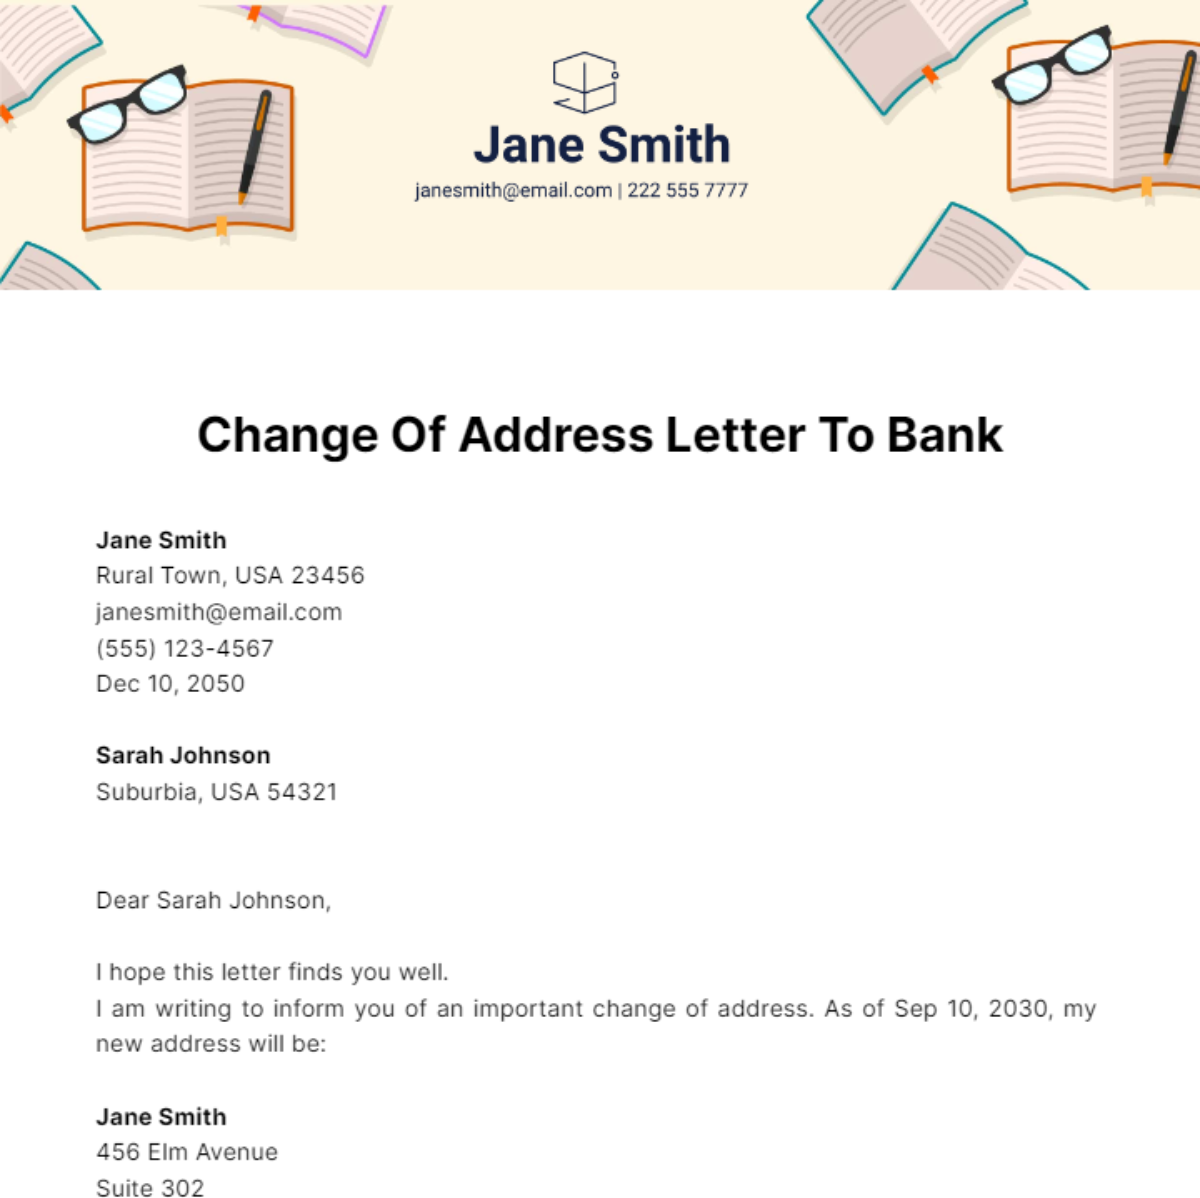 Change Of Address Letter To Bank Template - Edit Online & Download ...